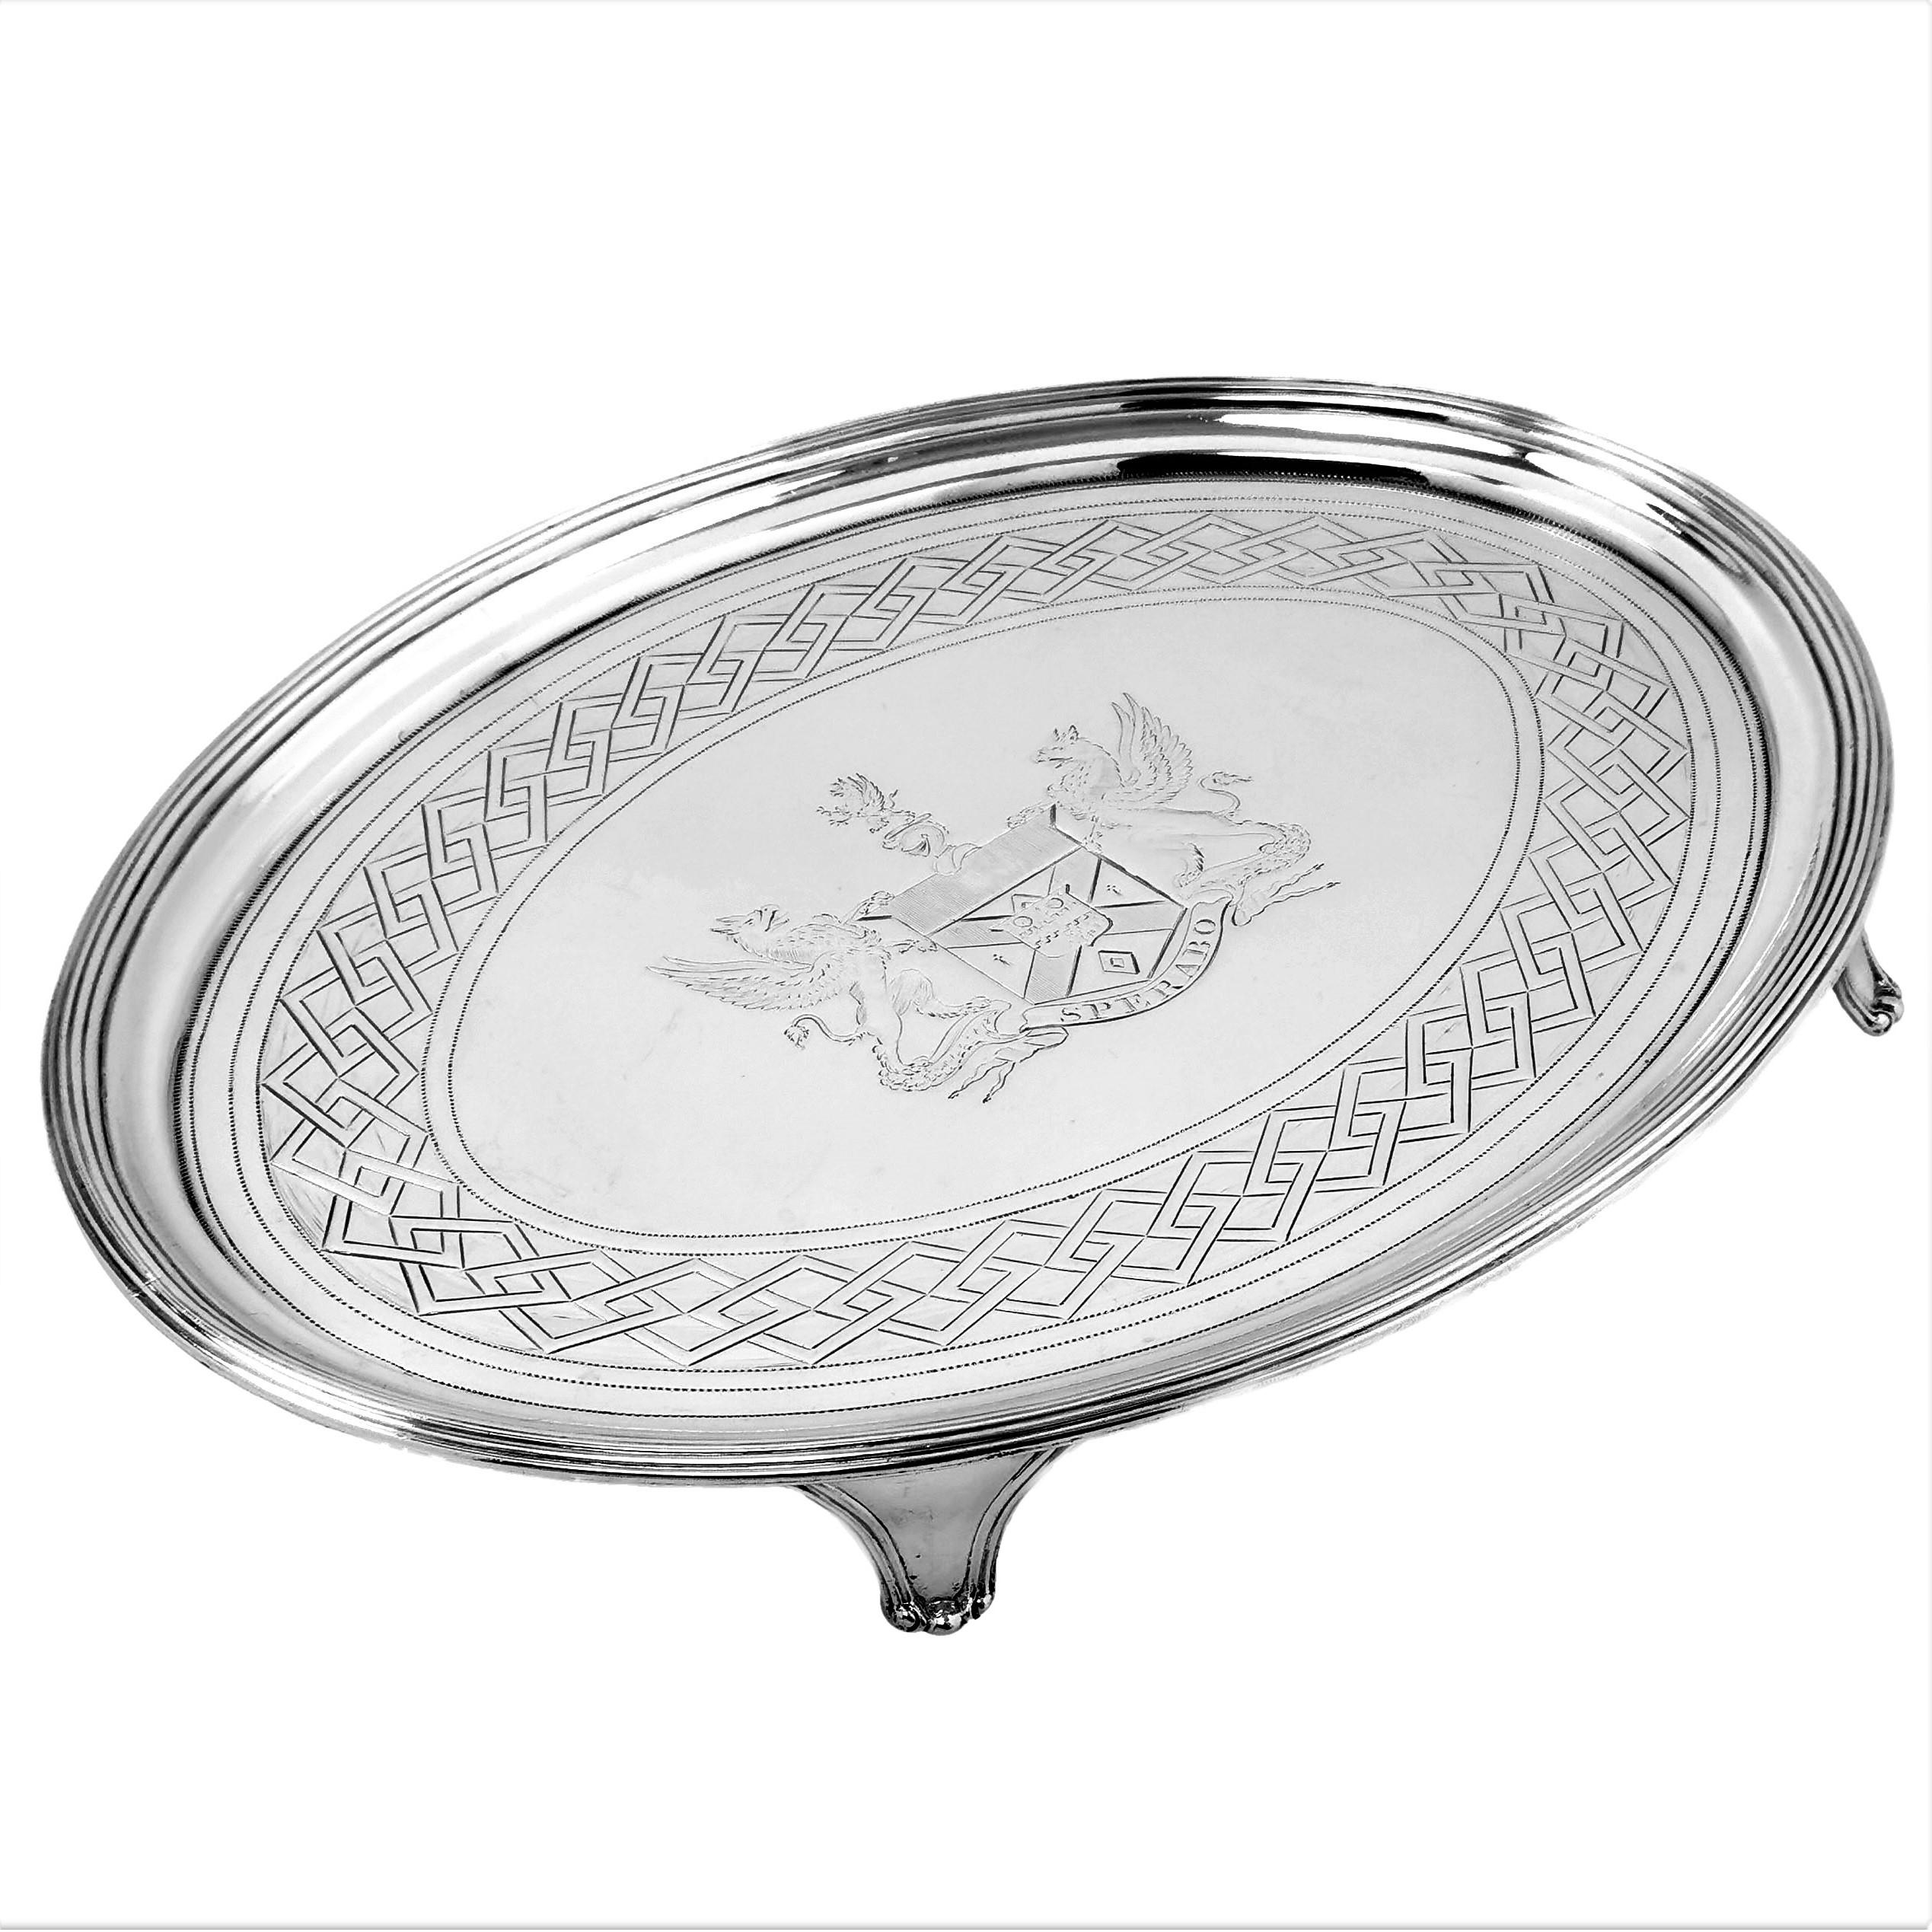 An elegant Antique George III solid Silver Oval Salver with an impressive engraved armorial in the centre and a geometric repeating engraved band around the edge of the Tray. The rim of the Salver has a The Salver stands on four shaped feet.

Made